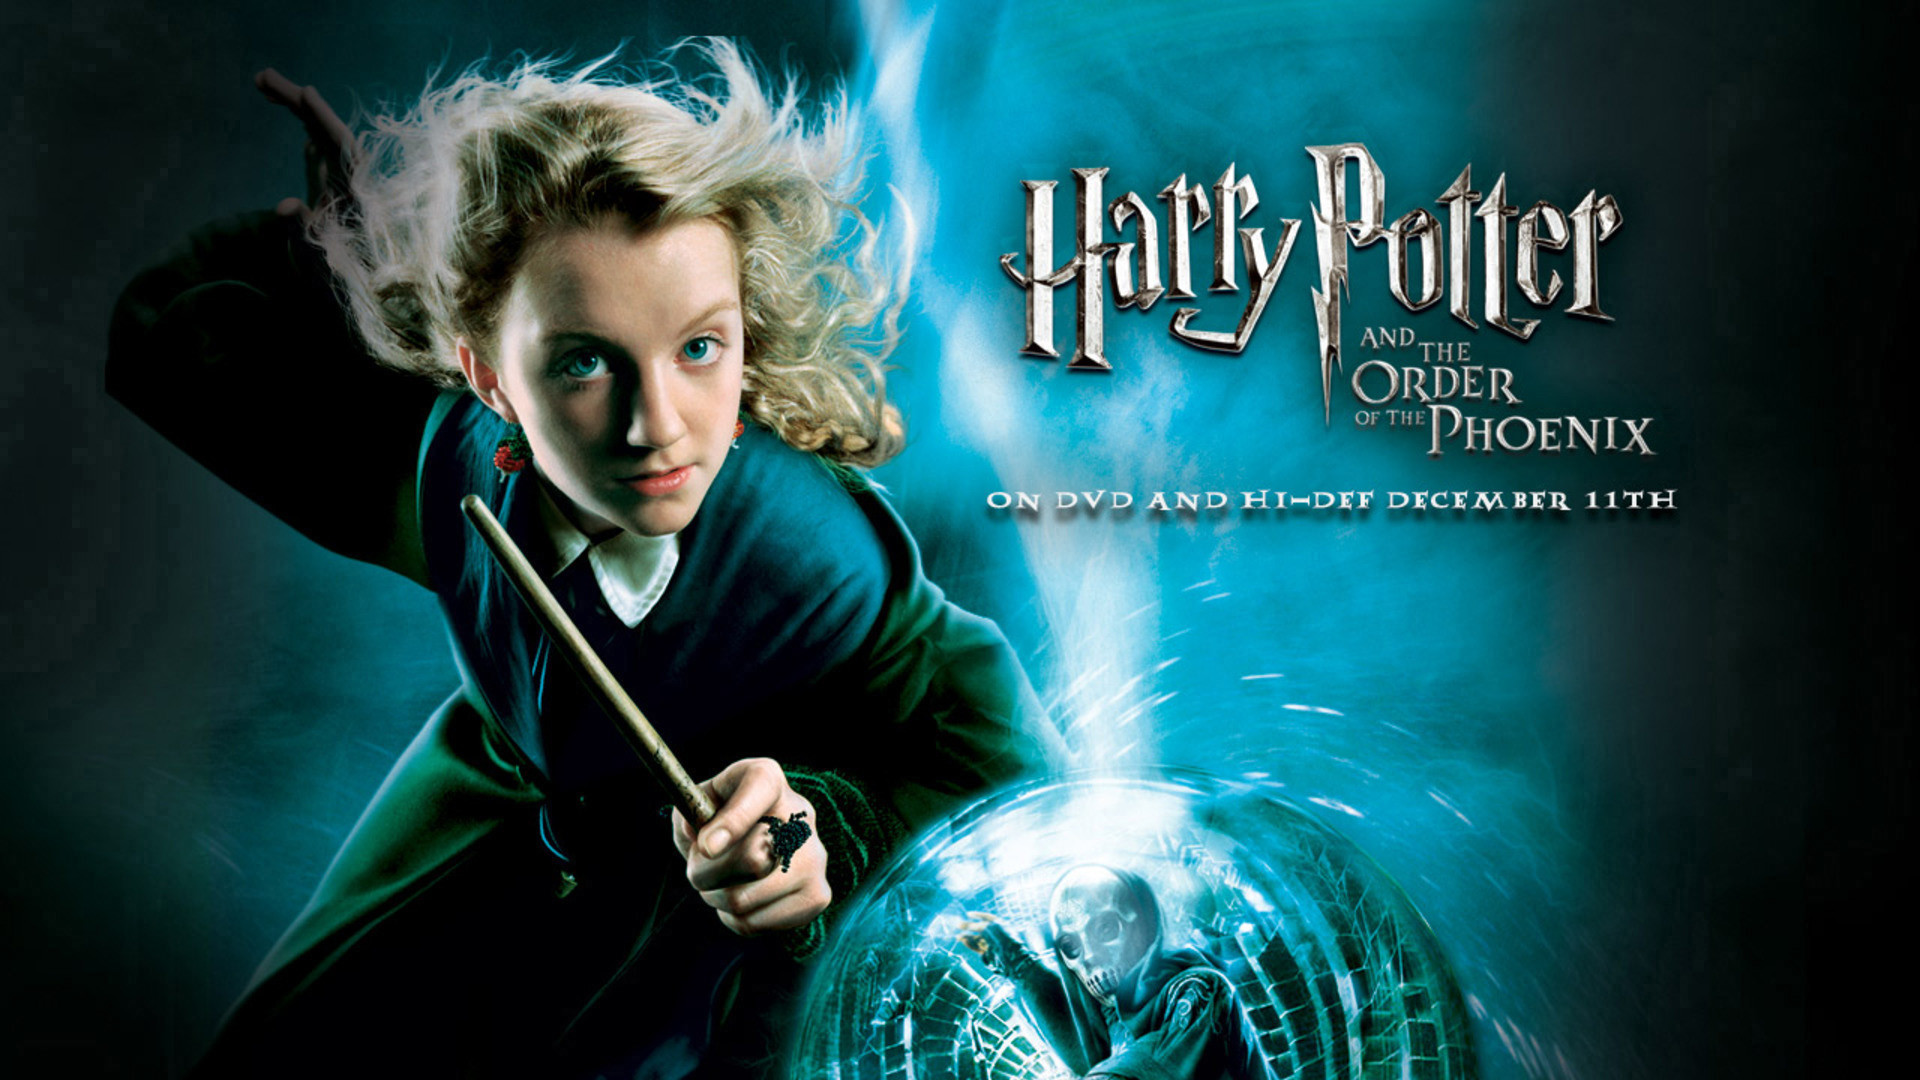 Published November 21 2010 At 1920 1080 In Harry Potter Movies Widescreen Wallpapers 1920x1080